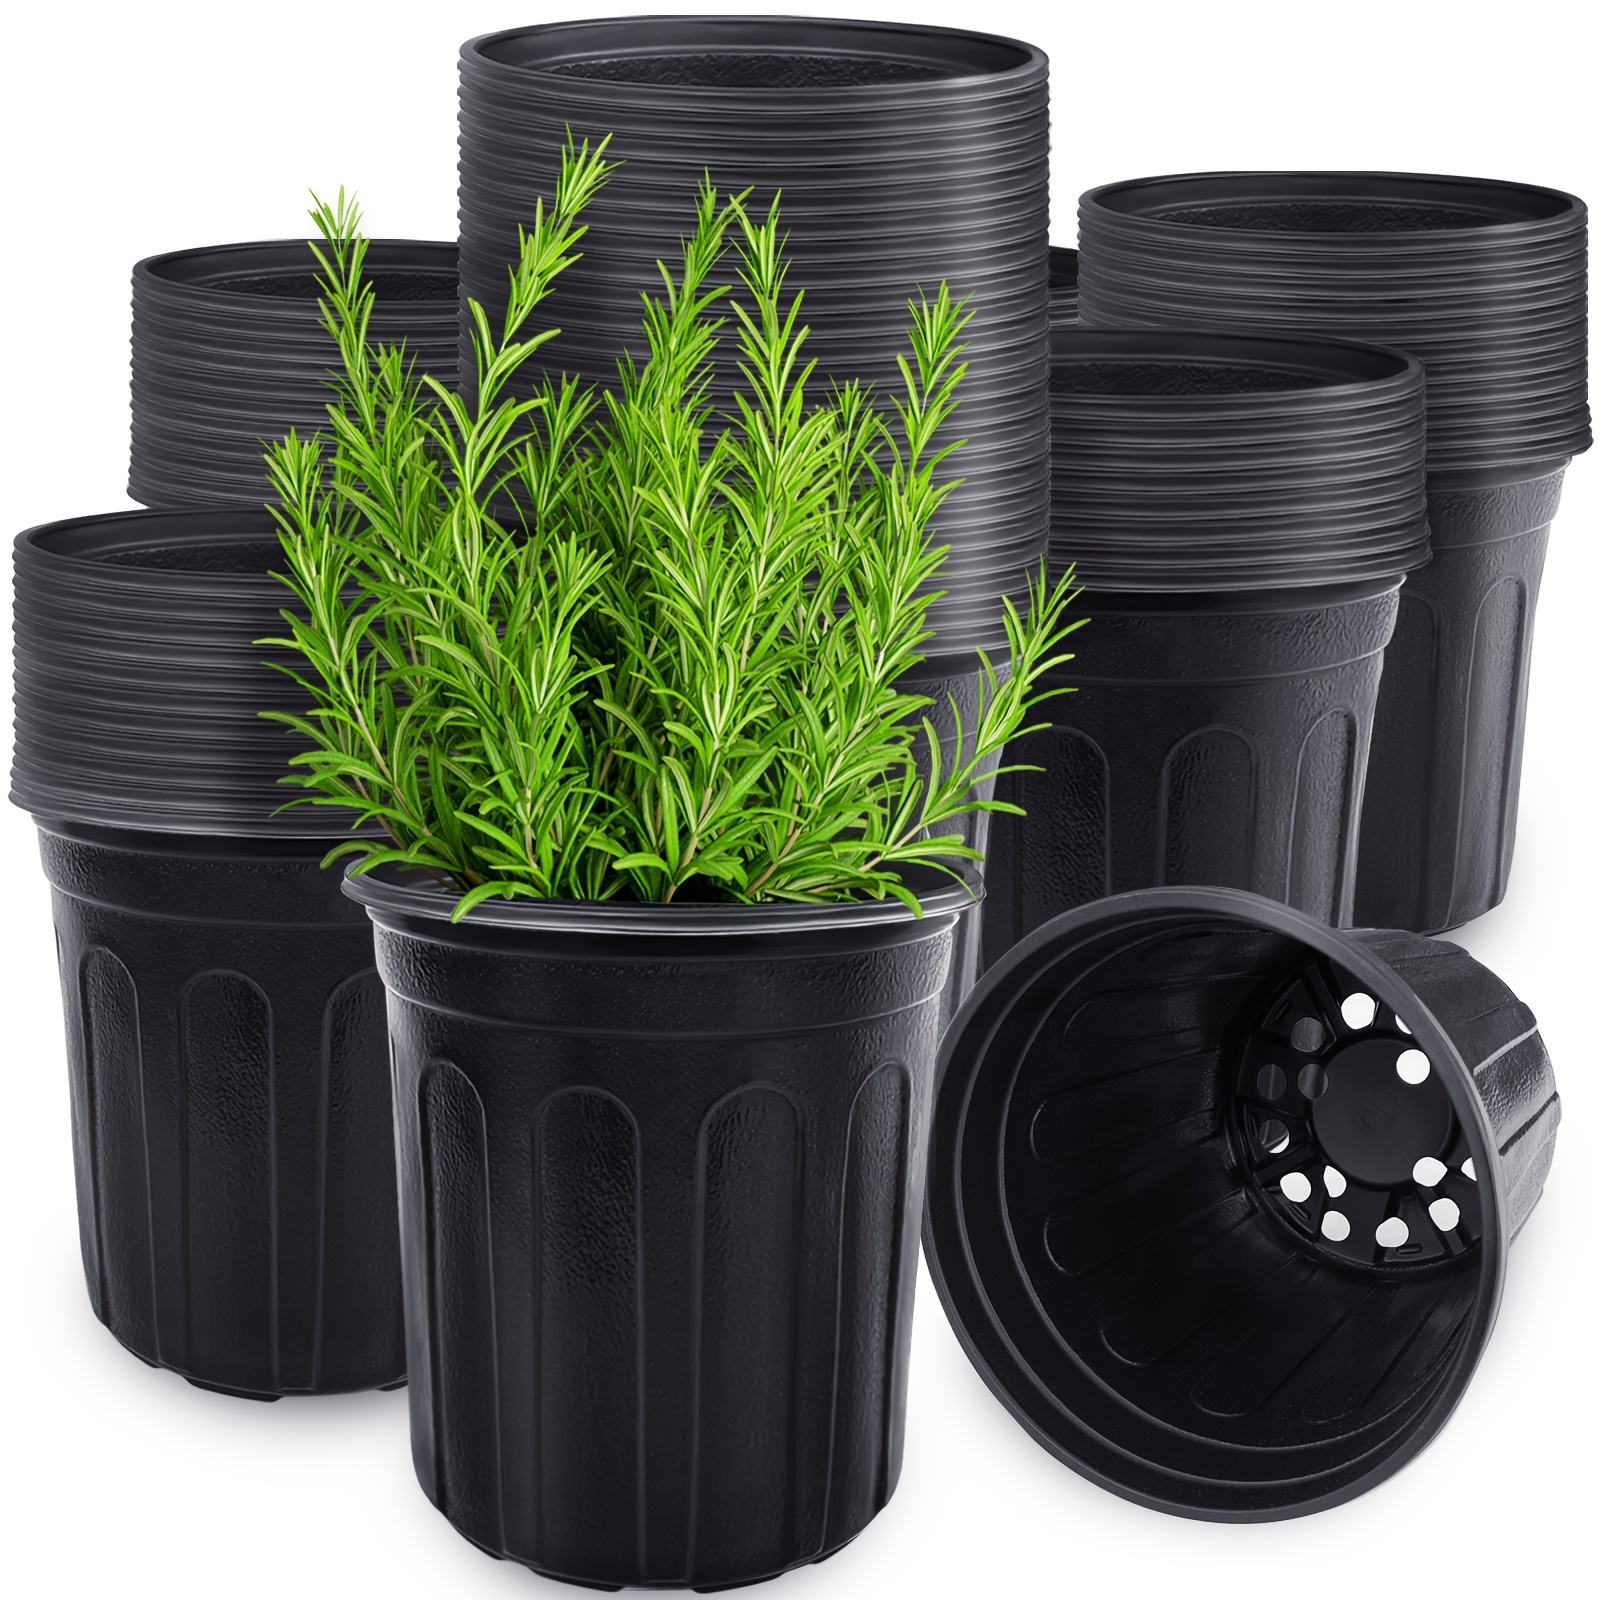 

60pcs, 1 Gallon Flexible Flower Plant Seedling Pots, Thickened Soft Plastic Seed Starter Containers For Succulent Plants, Seedlings, Sprouts, Transplants, (black)